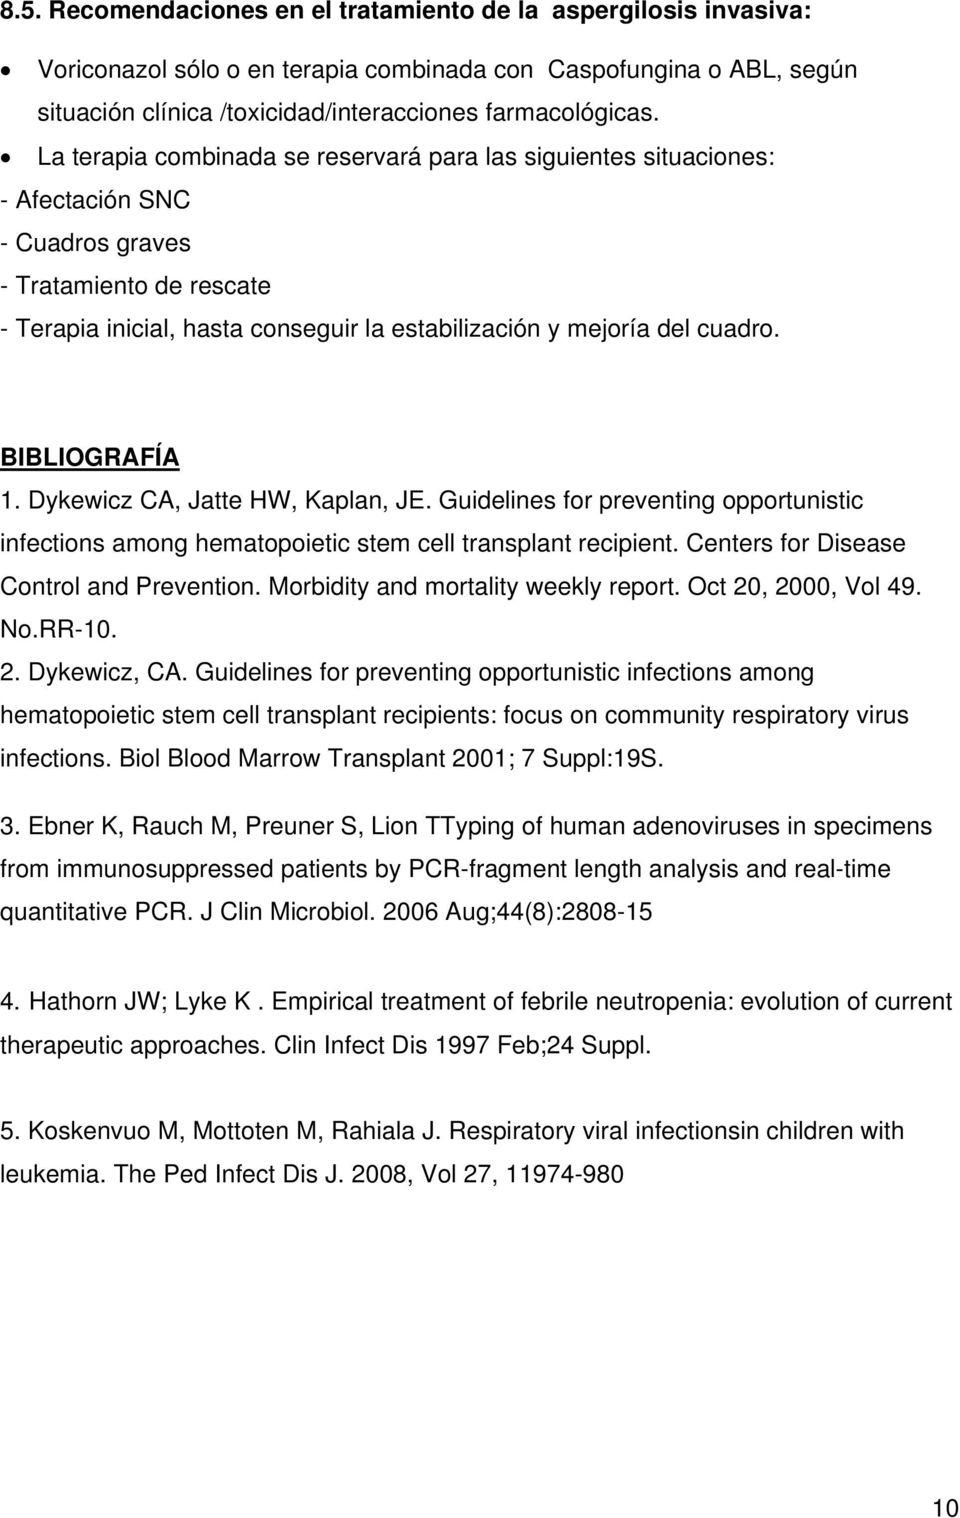 BIBLIOGRAFÍA 1. Dykewicz CA, Jatte HW, Kaplan, JE. Guidelines for preventing opportunistic infections among hematopoietic stem cell transplant recipient. Centers for Disease Control and Prevention.